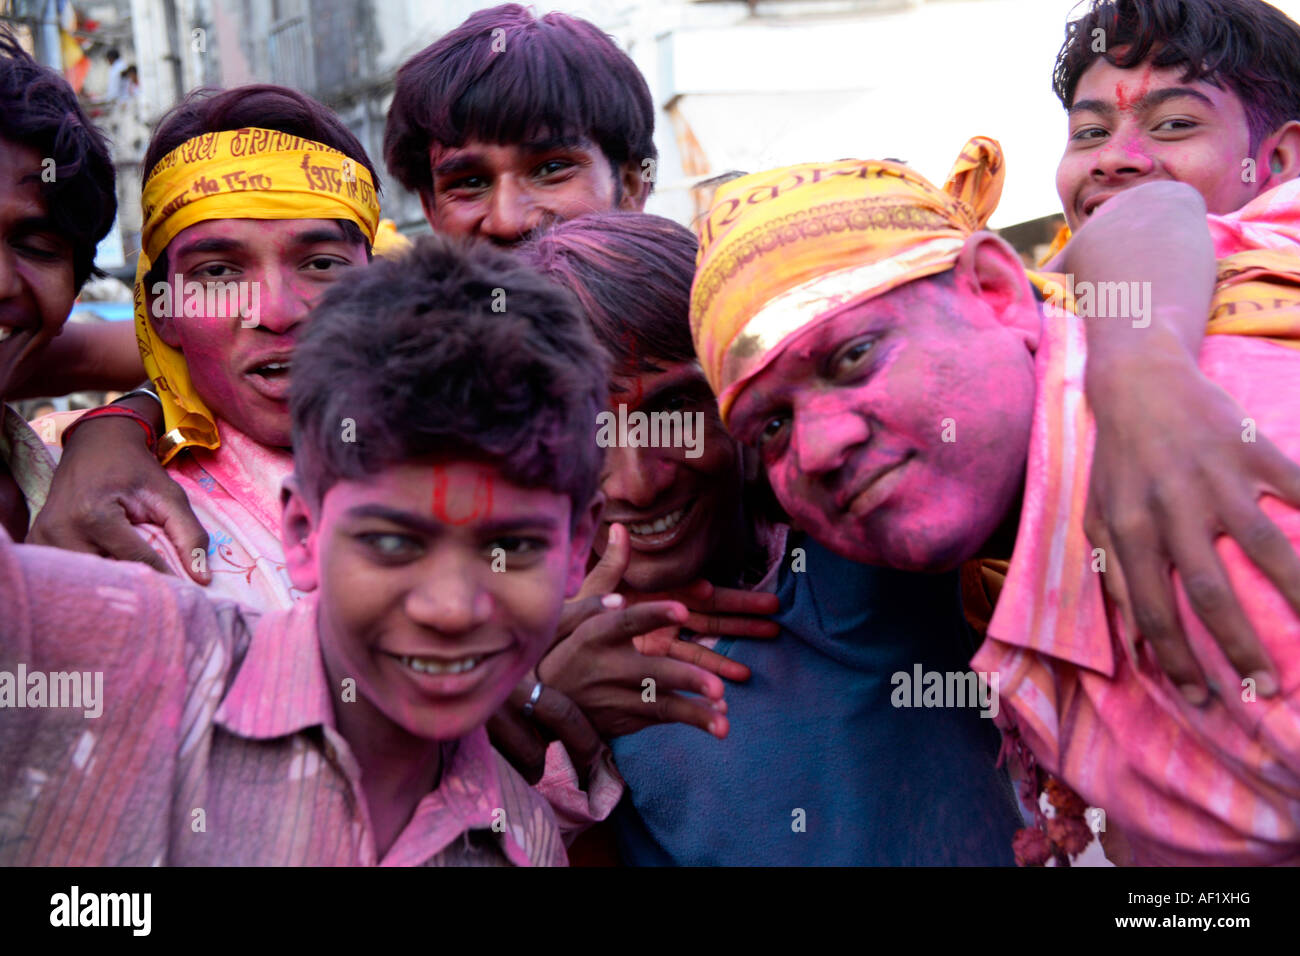 Indian males with pink paint splattered on faces and clothes celebrating holi spring festival of colours, Dwarka, Gujarat, India Stock Photo